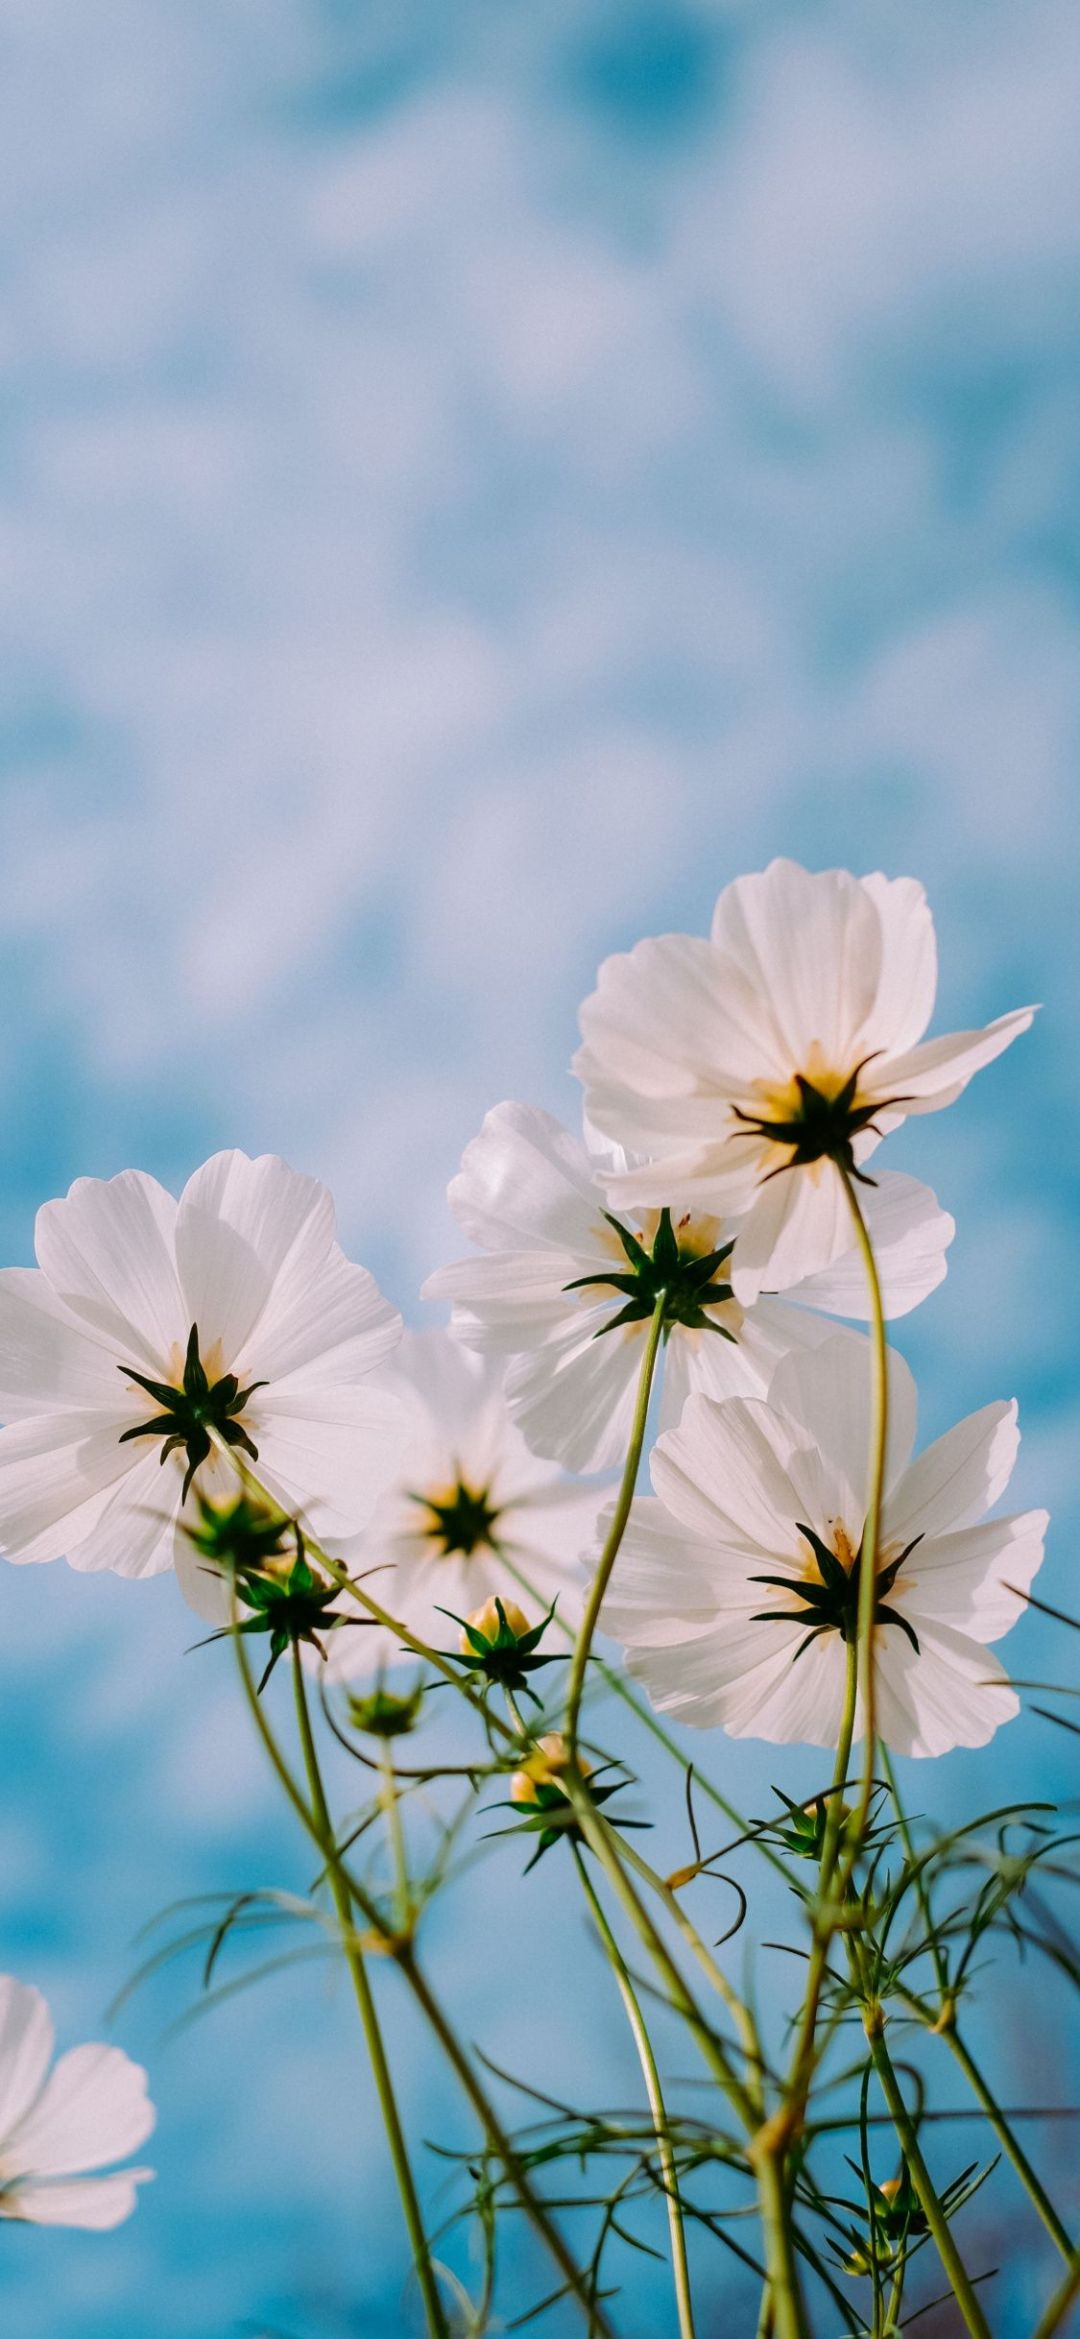 ✓[100+] White Cosmos, Bloom, Plants, Flowers, Wallpaper - Flower - Android  / iPhone HD Wallpaper Background Download (png / jpg) (2023)